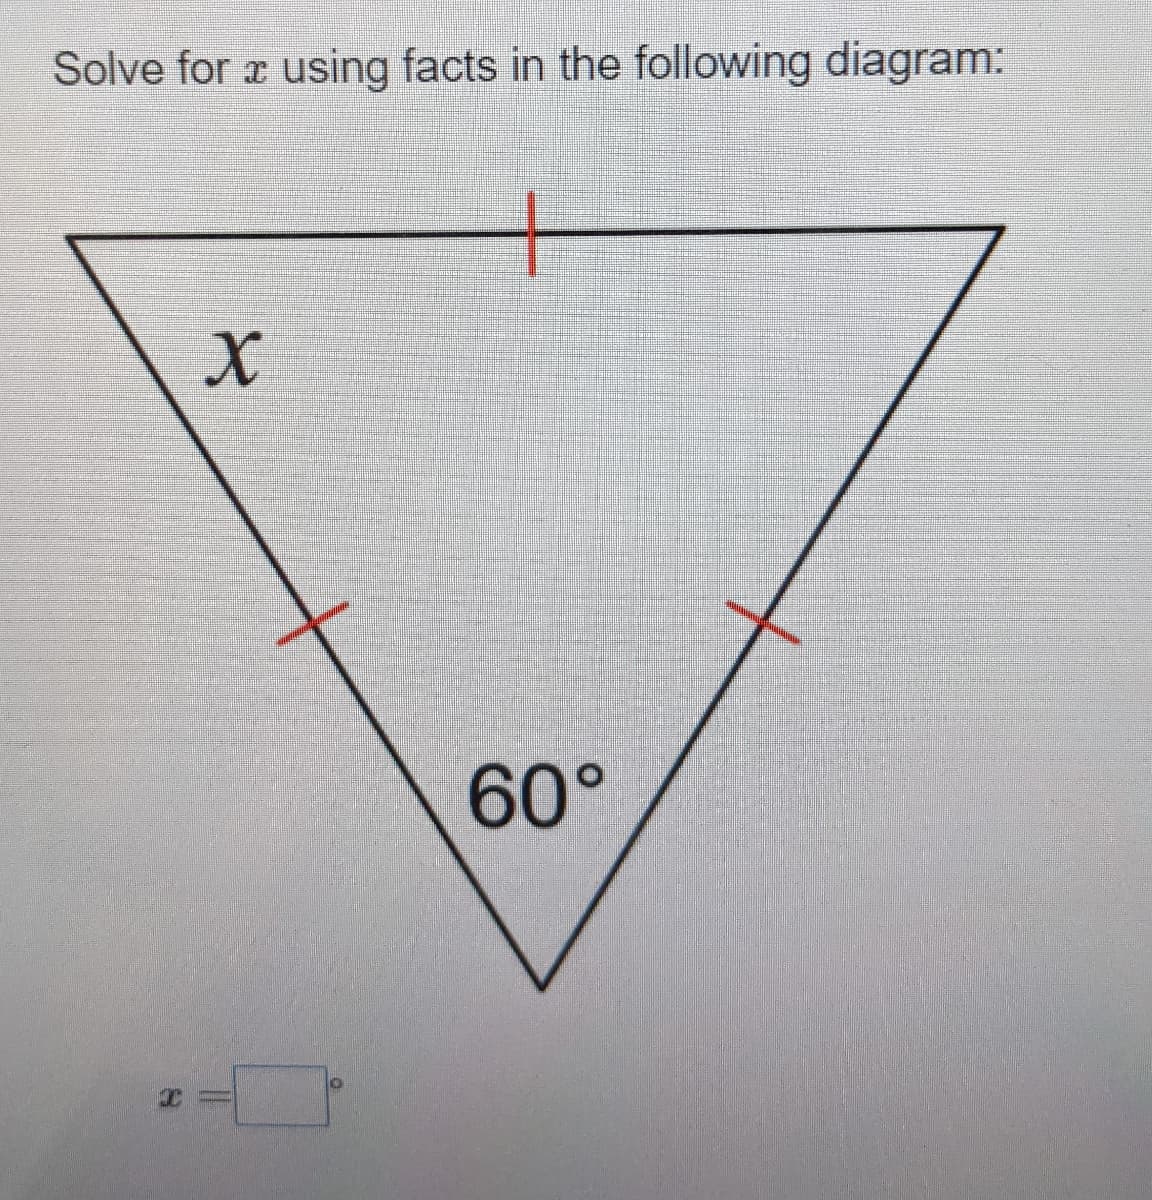 Solve for æ using facts in the following diagram:
+
60°
